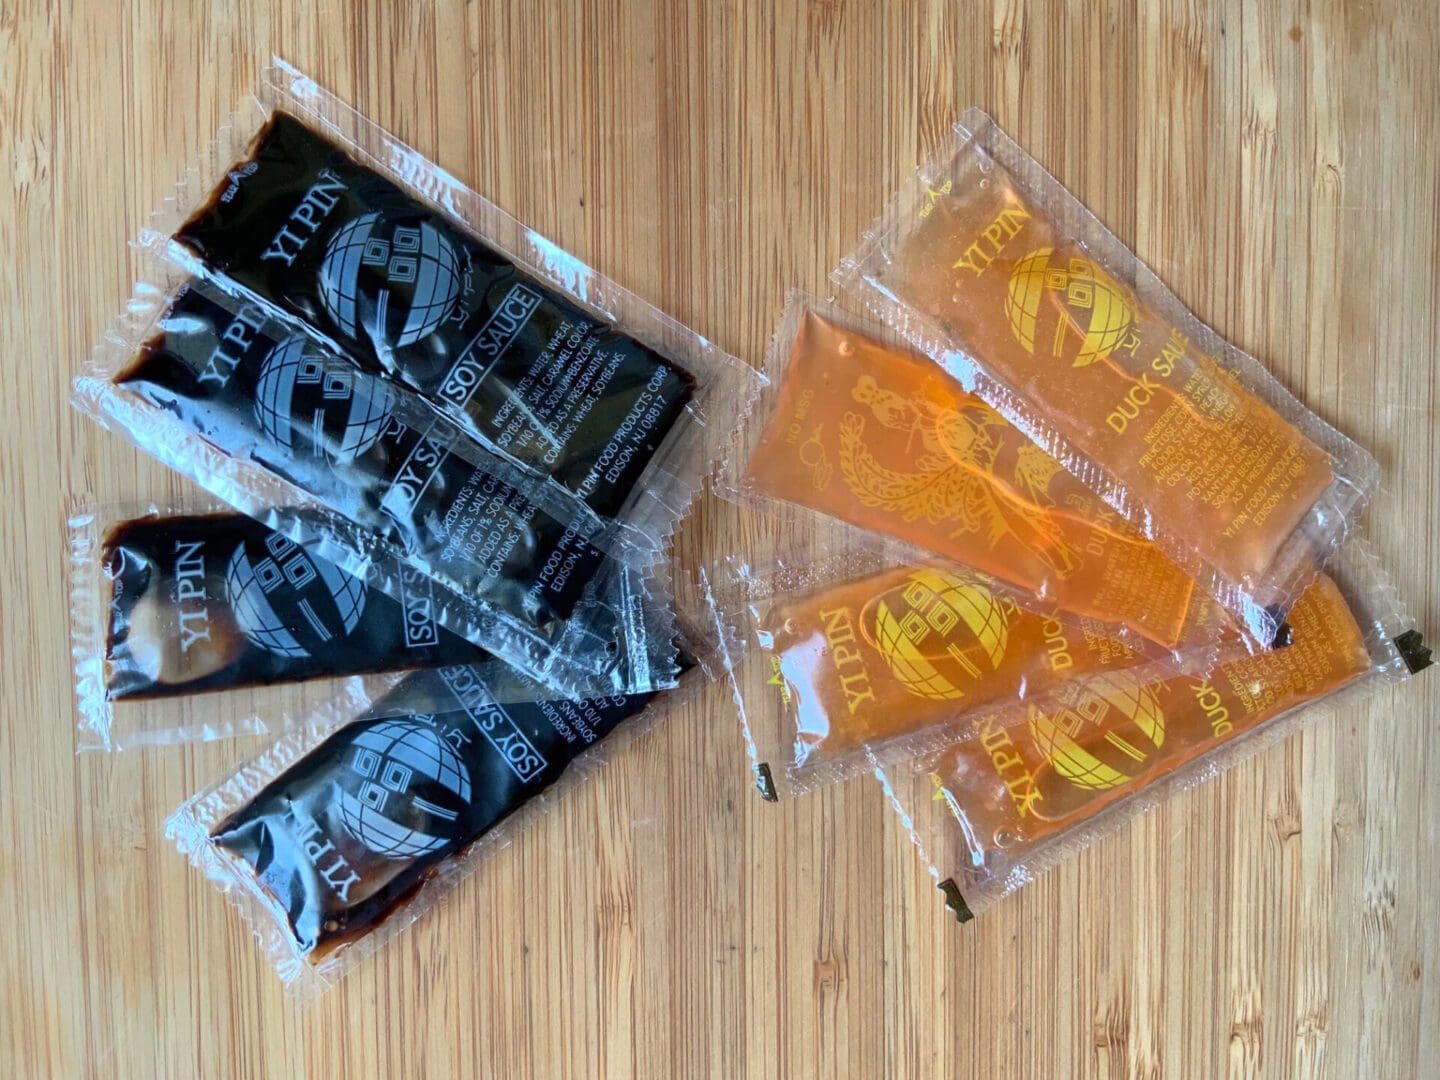 Packaged black and orange snack bars arranged on a wooden surface.